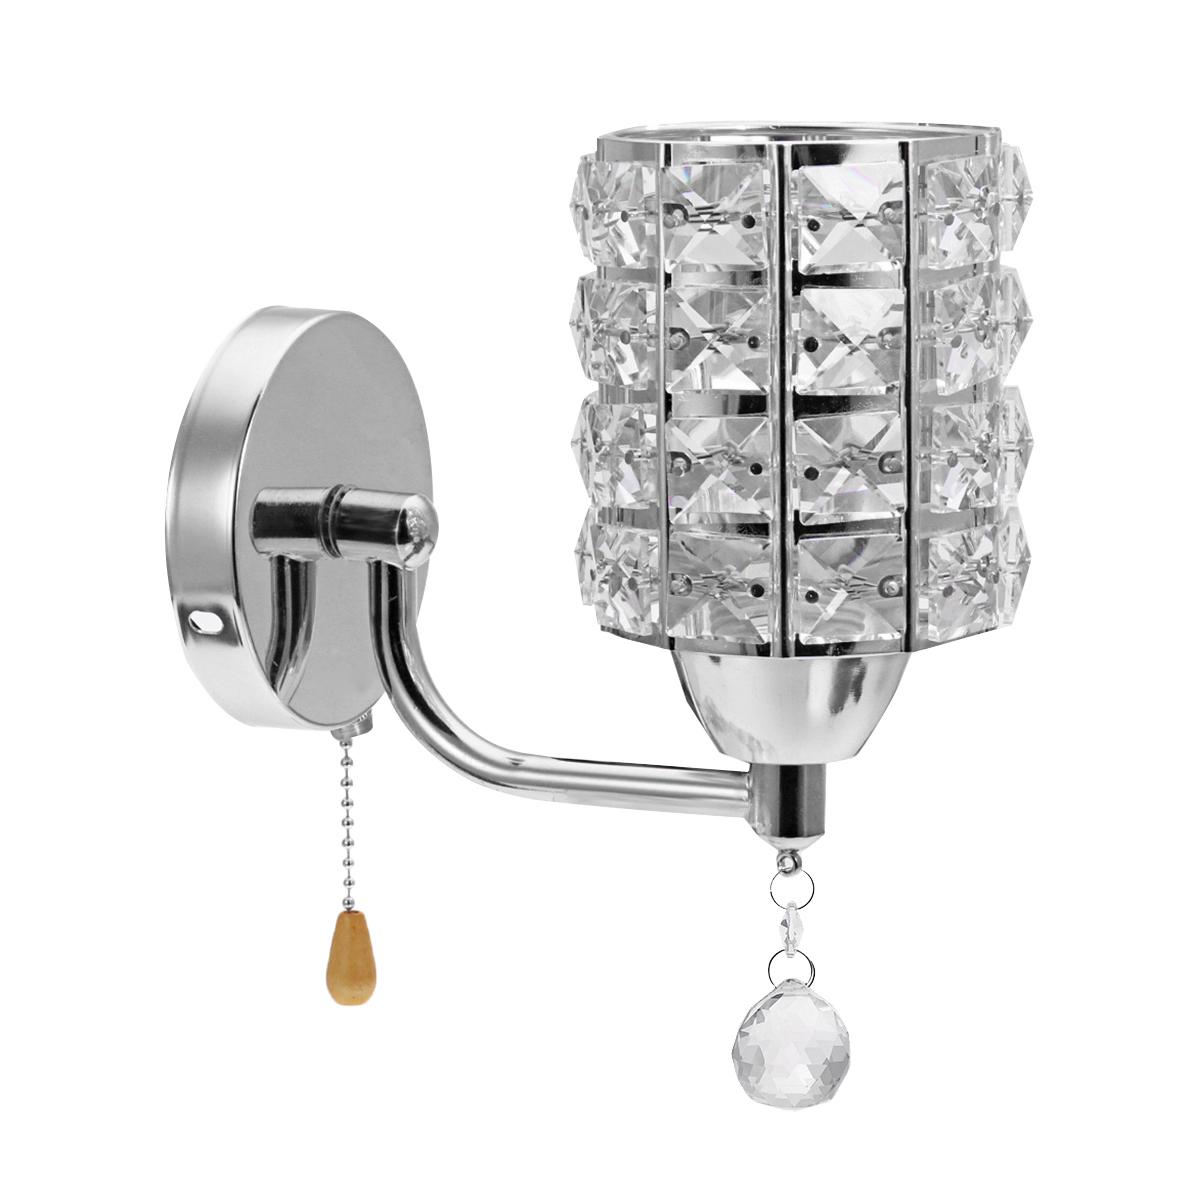 AC85-265V-Luxury-Crystal-Wall-Light-Modern-E27-Bedroom-Aisle-Sconce-Lighting-Lamp-Fixtures-Without-B-1794630-5